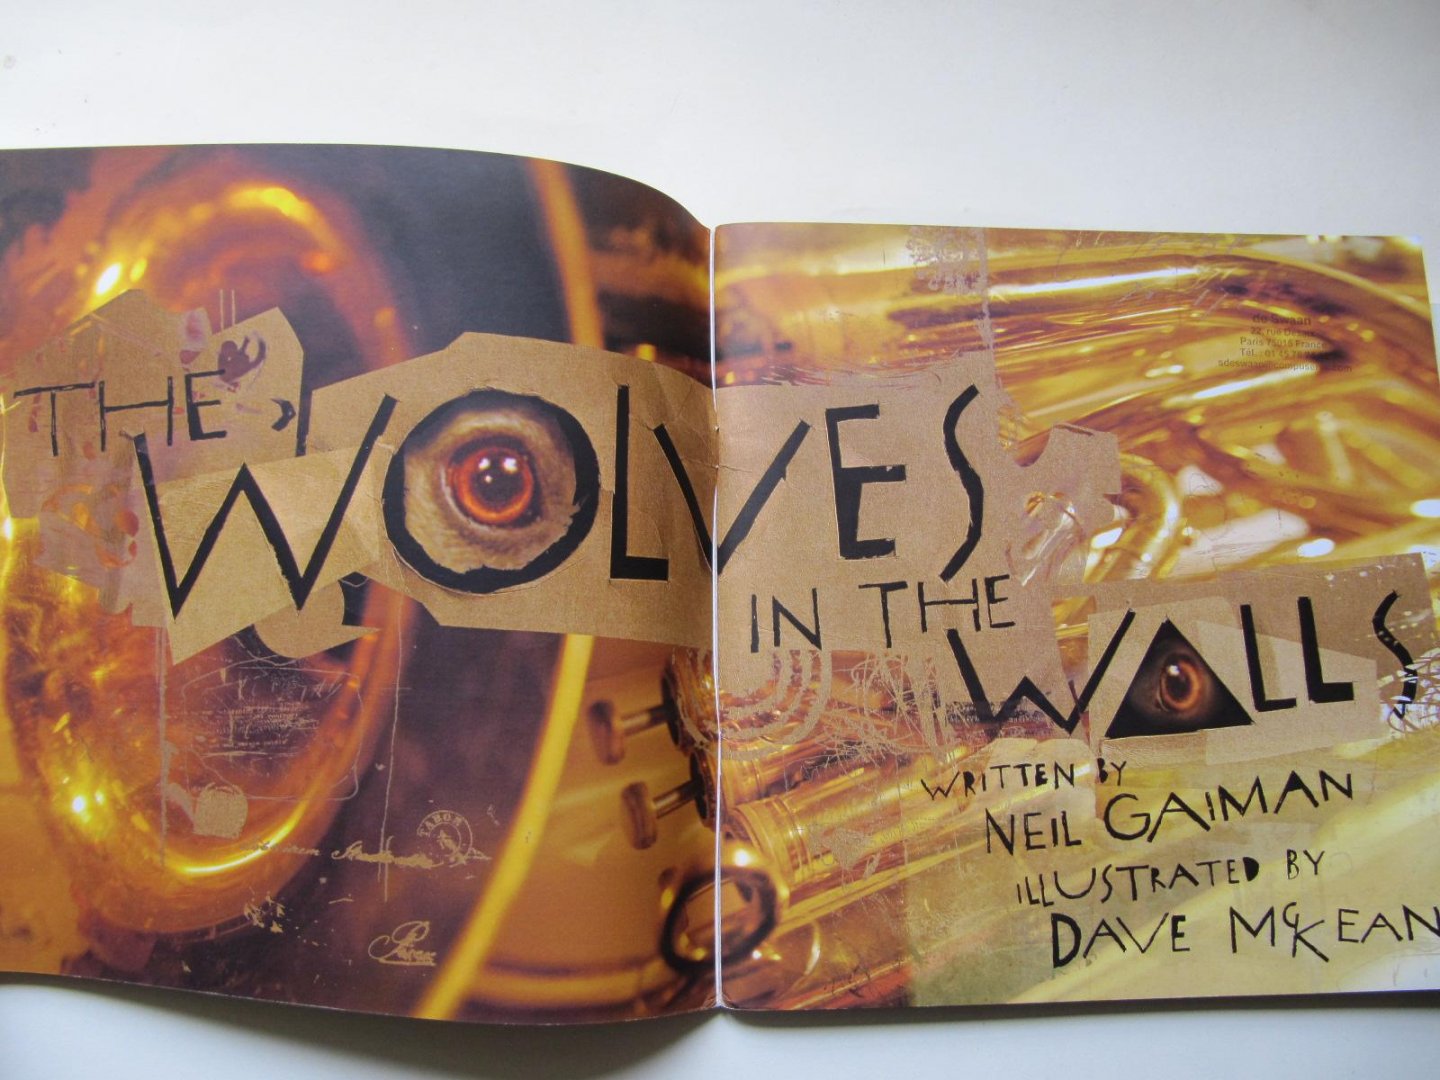 Neil Gaiman - The wolves in the walls